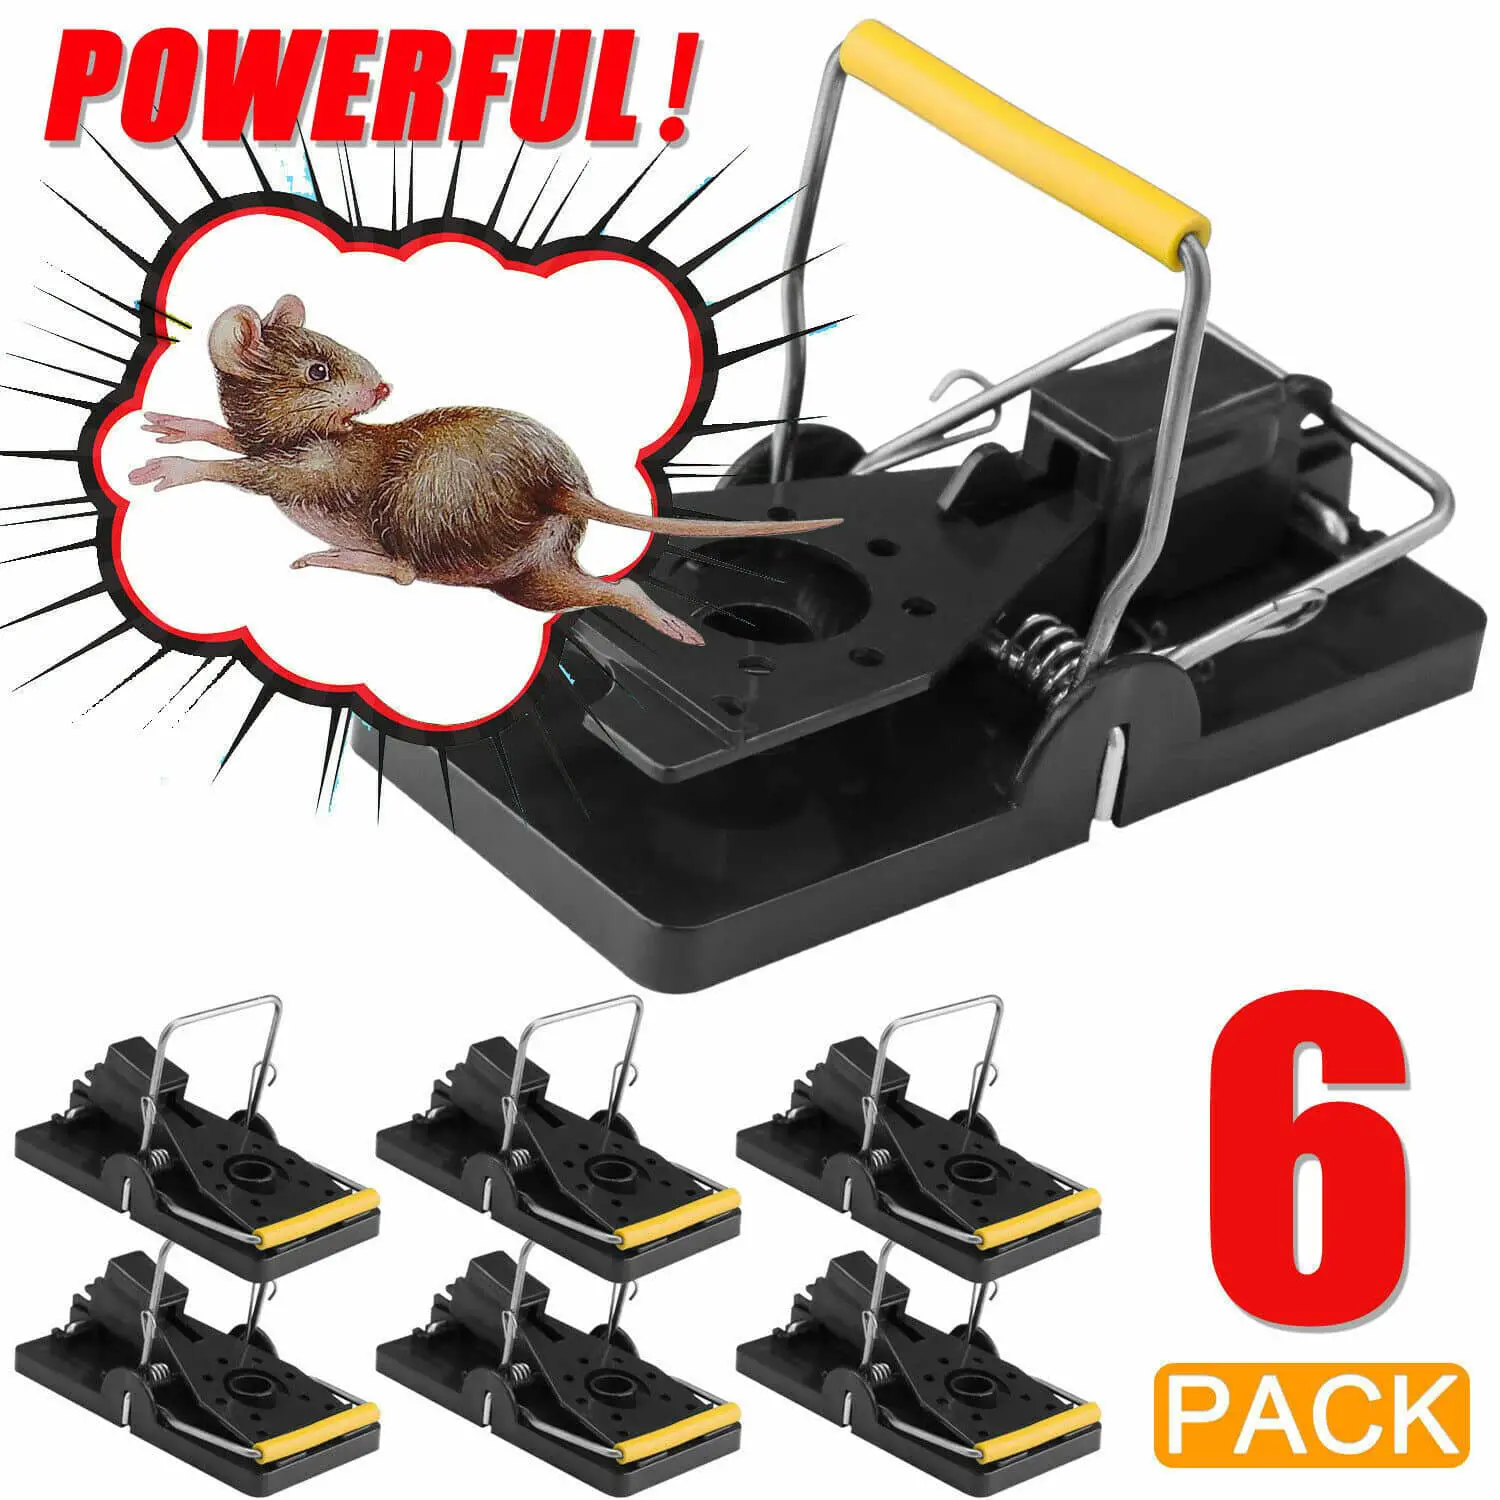 6 Pack Reusable Mouse Traps Snap Mice Instant Kill Rodent Catcher Mouse ...